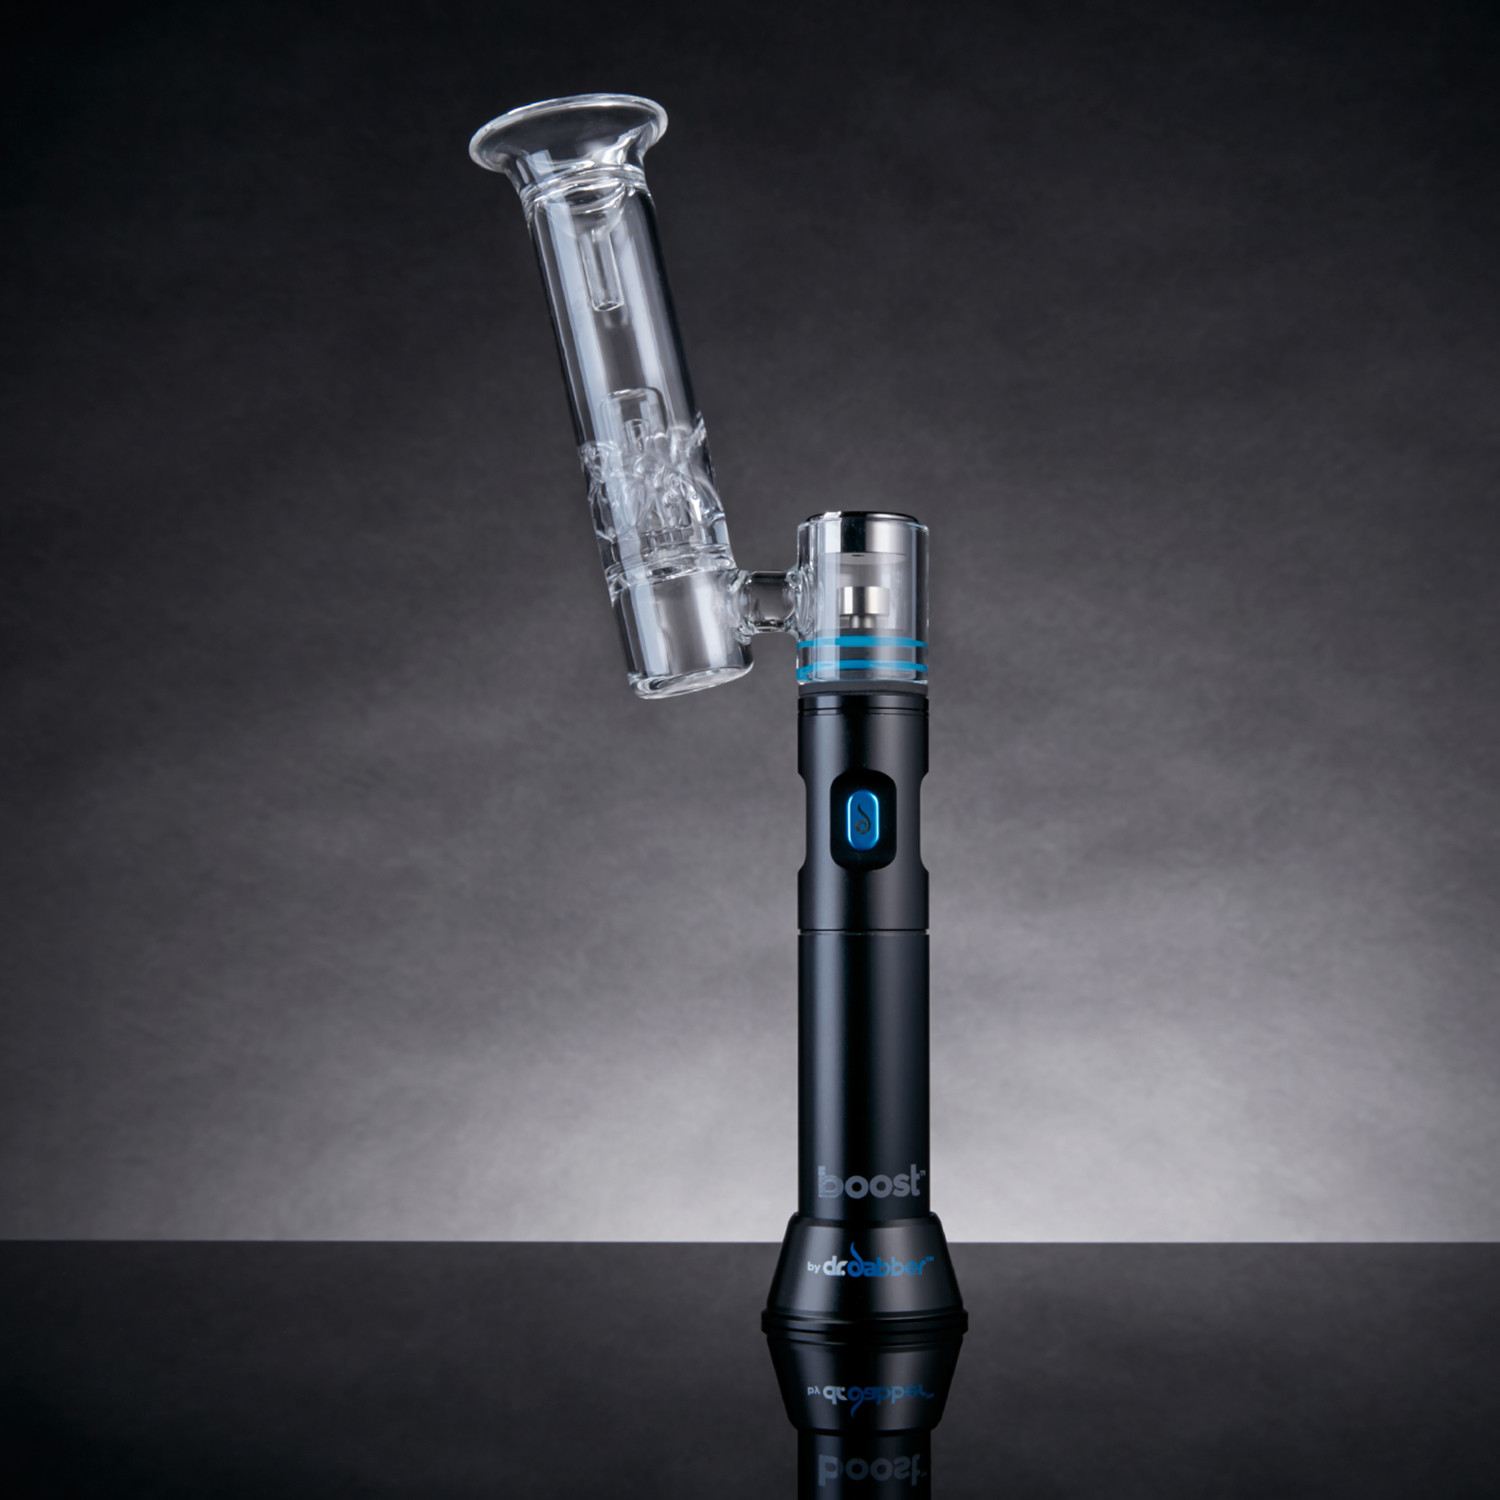 boost-erig-dr-dabber-touch-of-modern